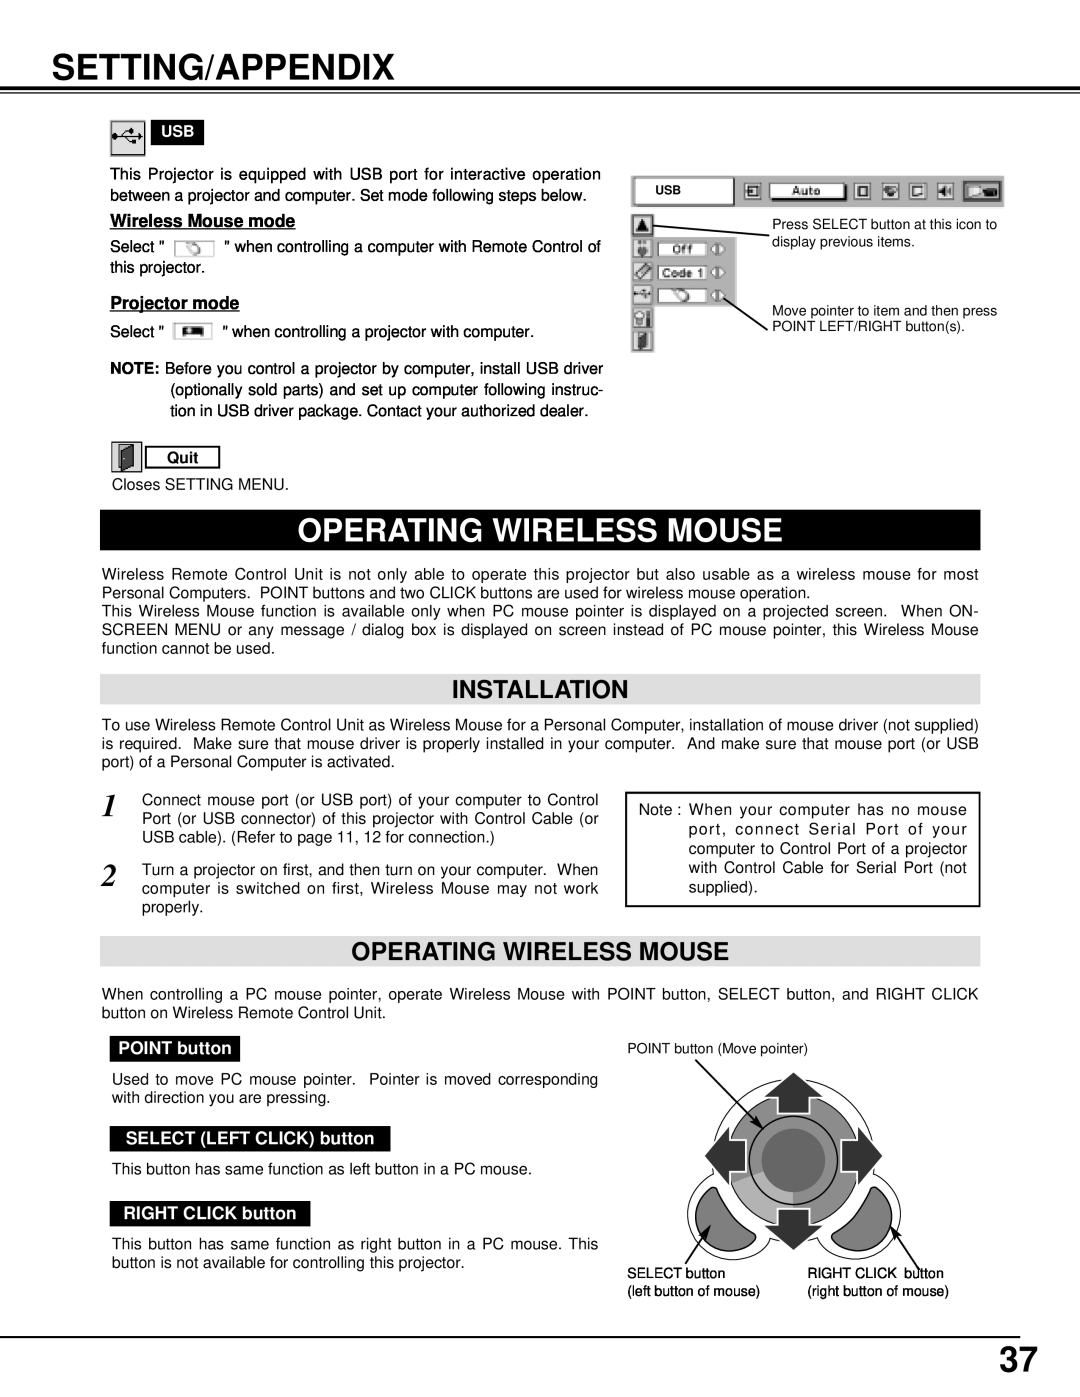 BOXLIGHT MP-41T manual Setting/Appendix, Operating Wireless Mouse, Installation, Quit 